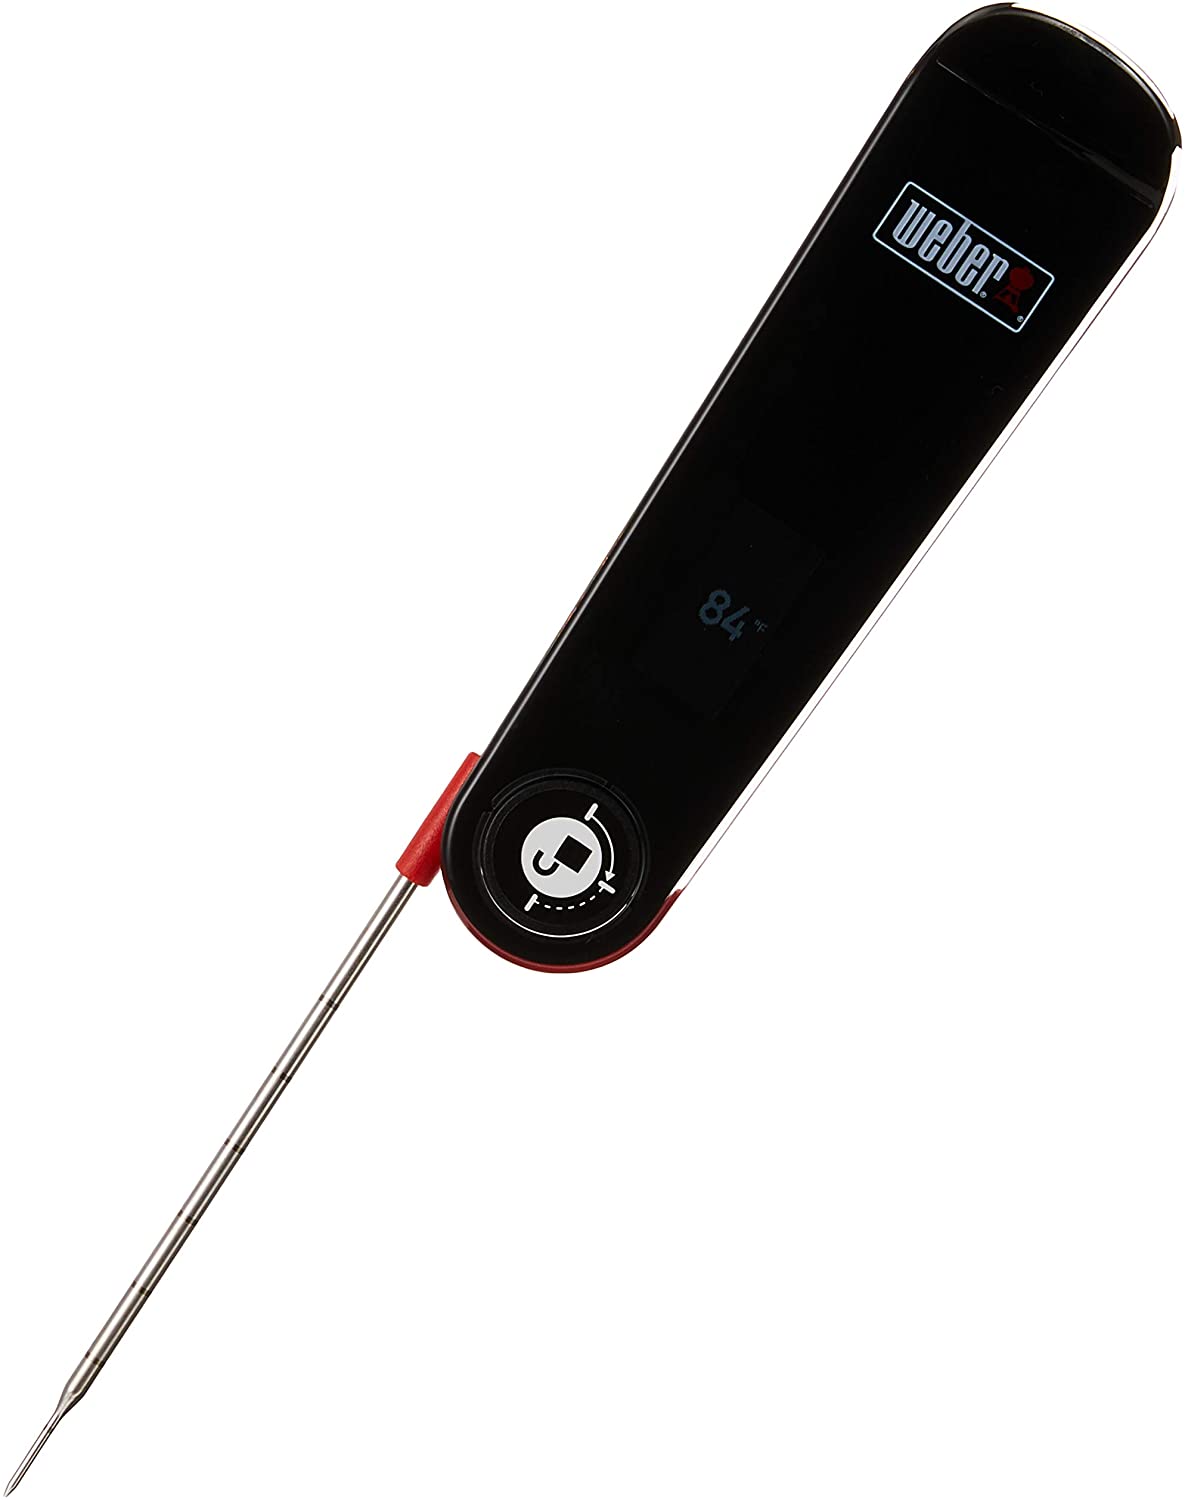 Weber 6752 Digital Thermometer Folding Stainless Steel 3.2 x 10.8 x 5 cm